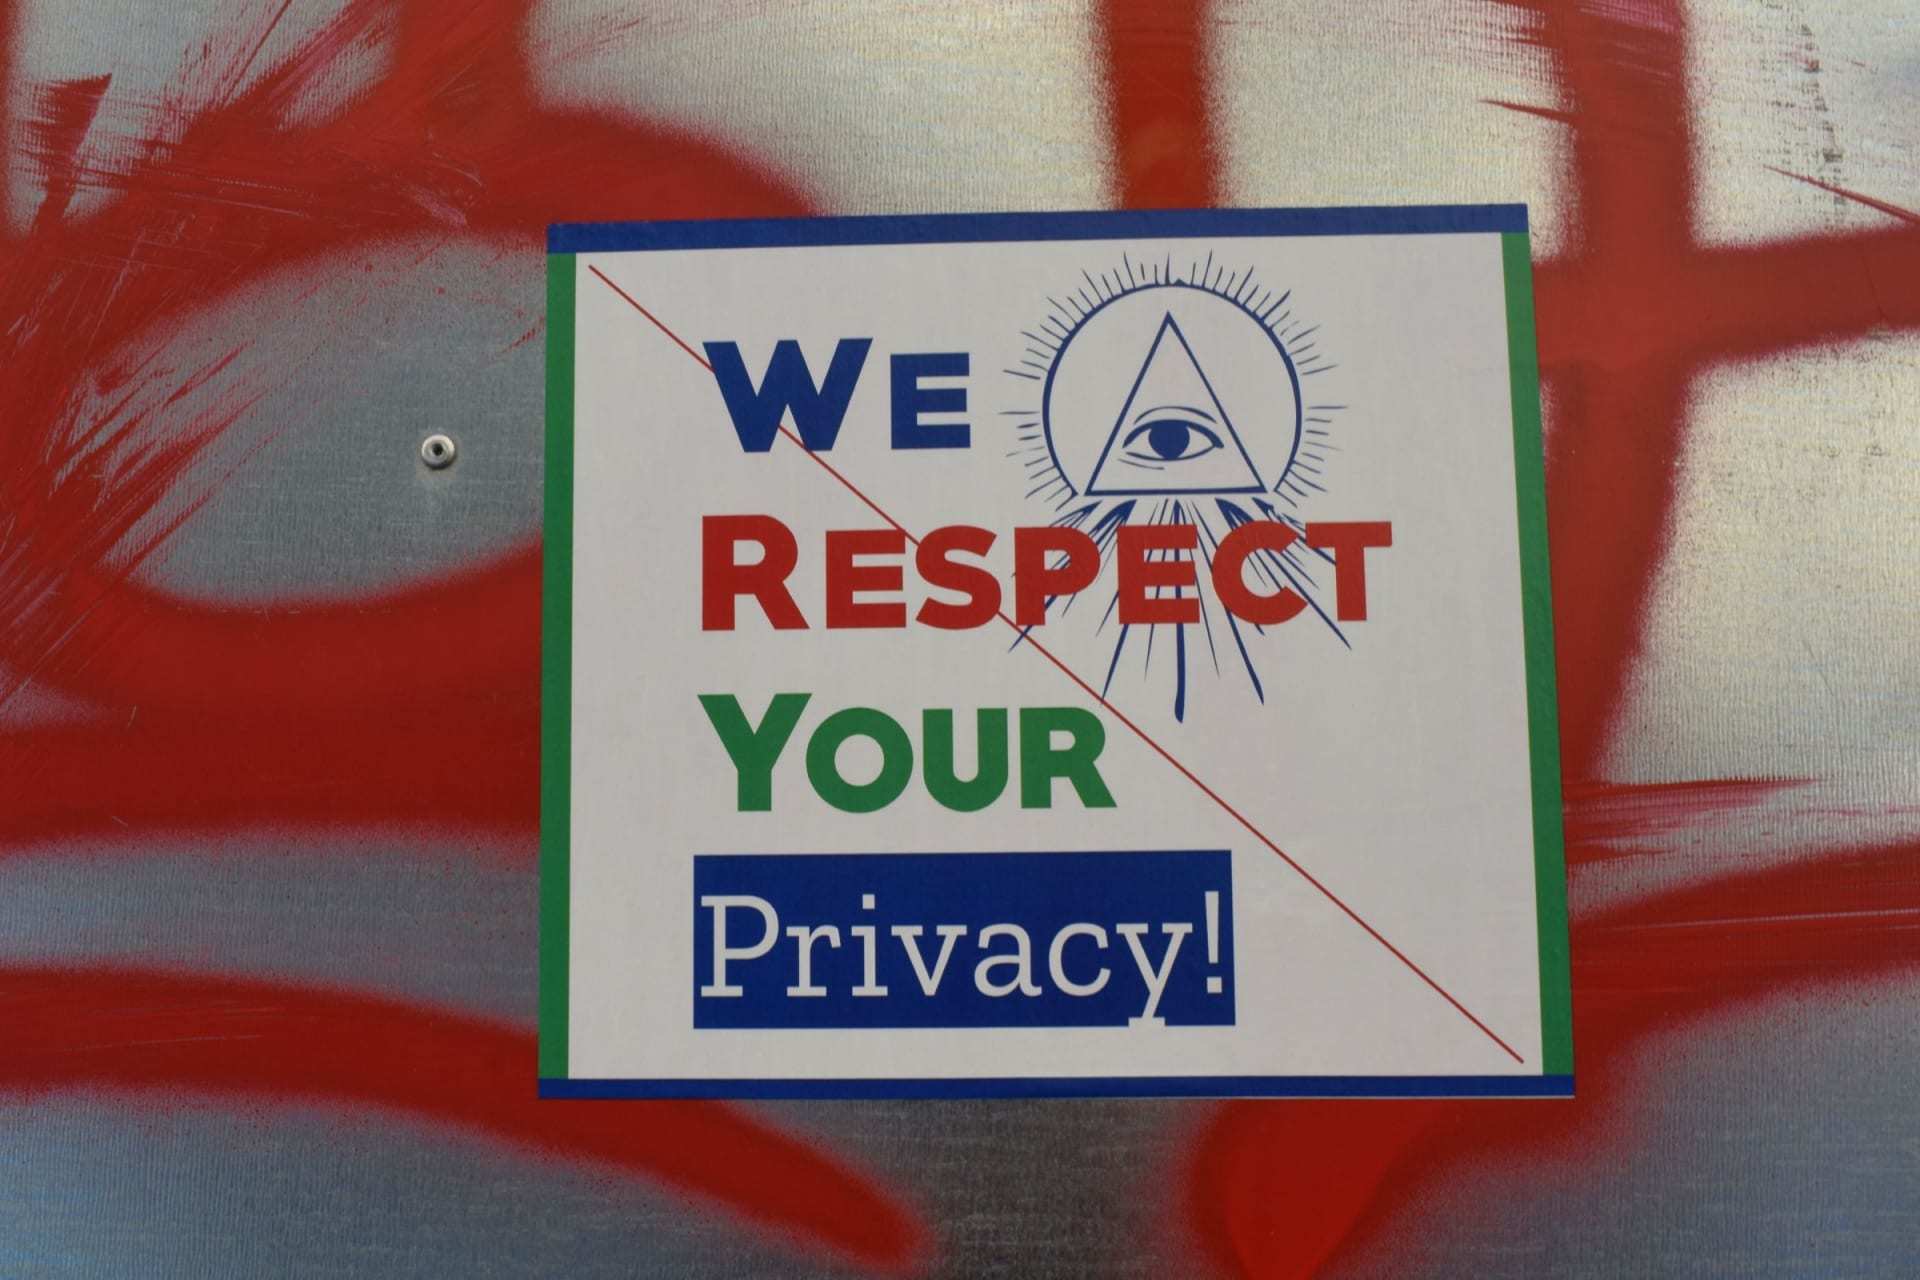 We respect your privacy